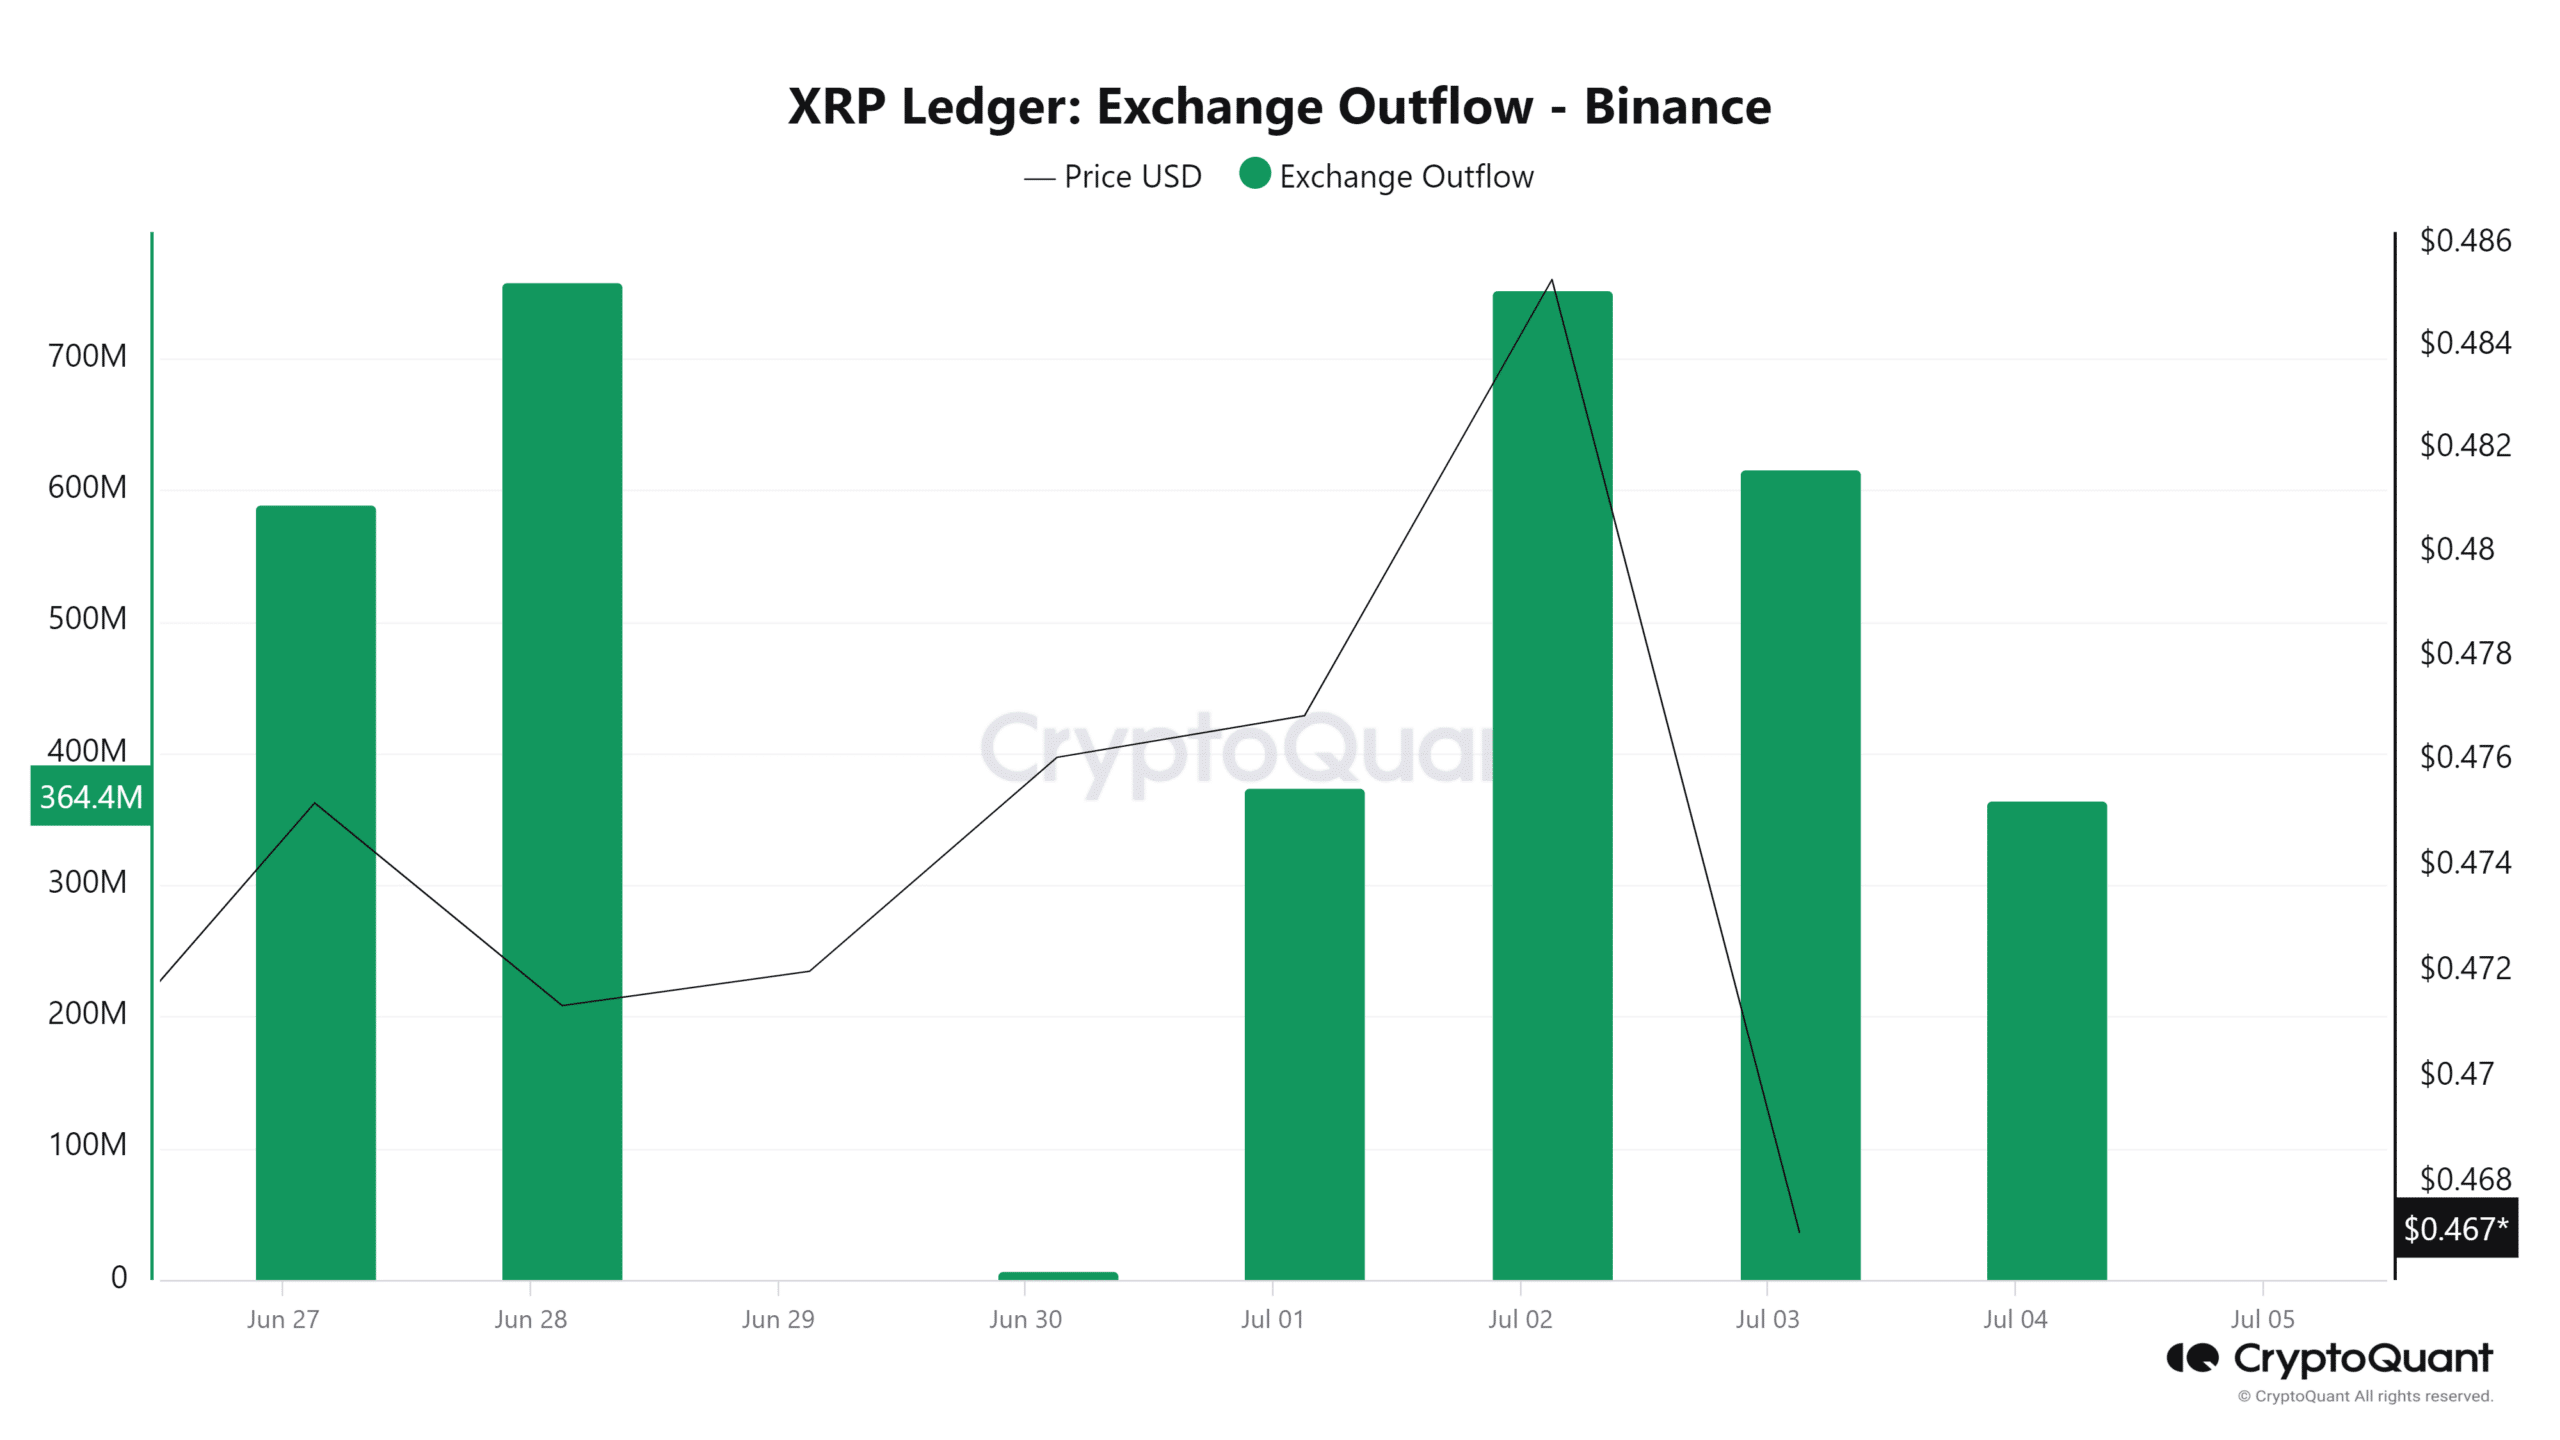 XRP Ledger Exchange Outflow Binance